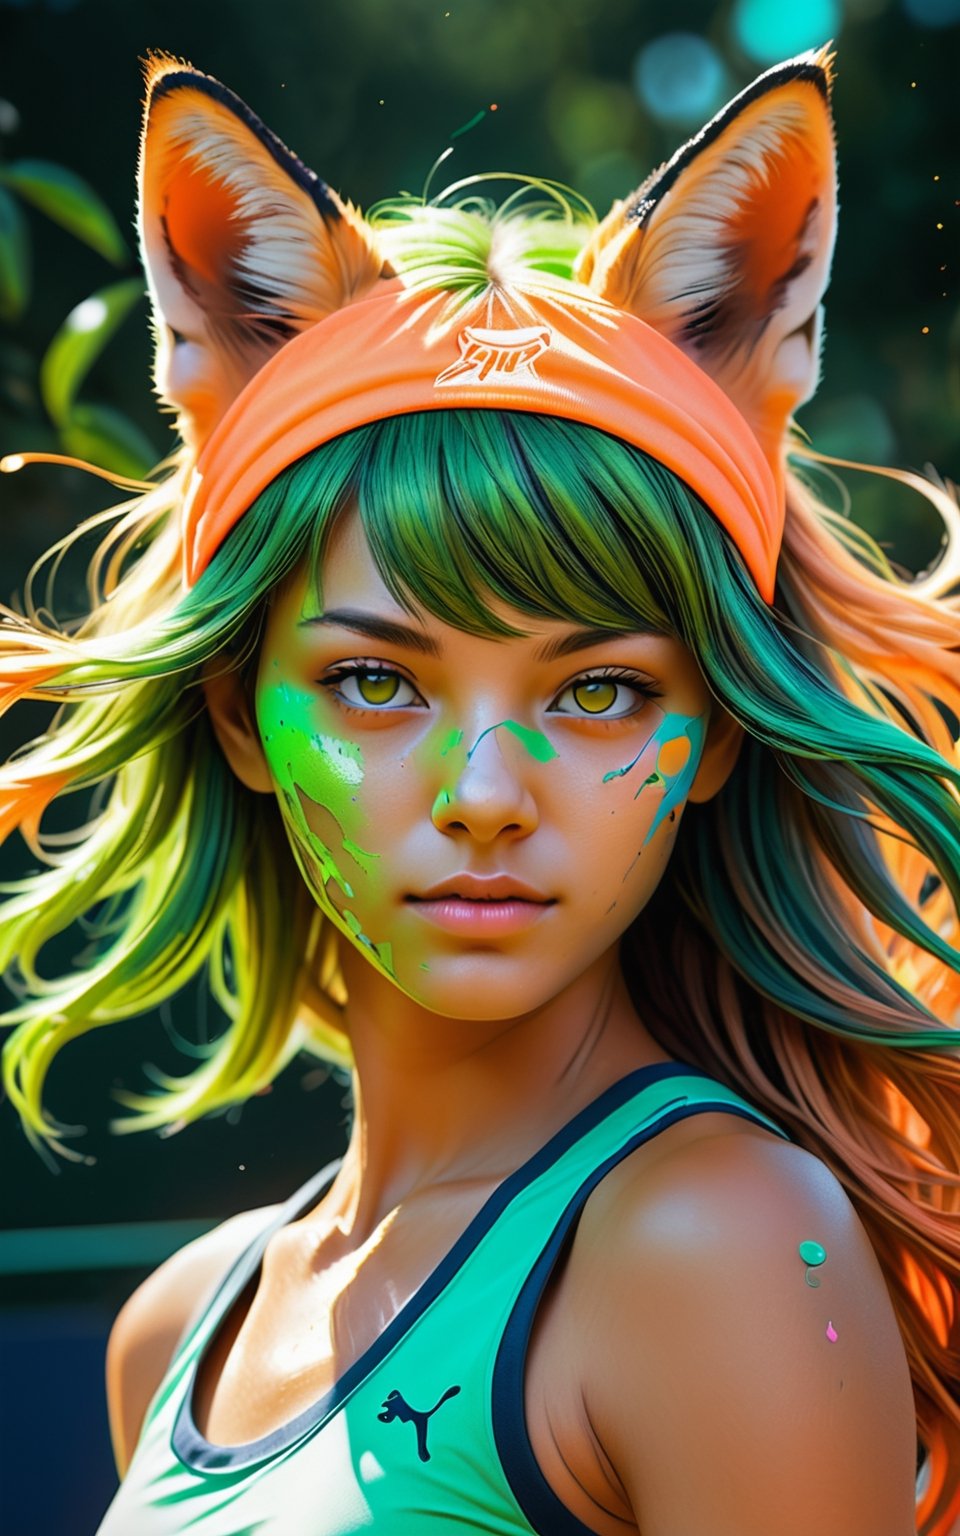 Tiger tennis player in tennis court, (masterpiece:1.1), (highest quality:1.1), (HDR:1.0), extreme quality, cg, (negative space), detailed face+eyes, 1girl, fox ears, (plants:1.18), (fractal art), (bright colors), splashes of color background, colors mashing, paint splatter, complimentary colors, neon, compassionate, electric, limited palette, synthwave, fine art, tan skin, full body, (green and orange:1.2), time stop, sy3, SMM,photo r3al